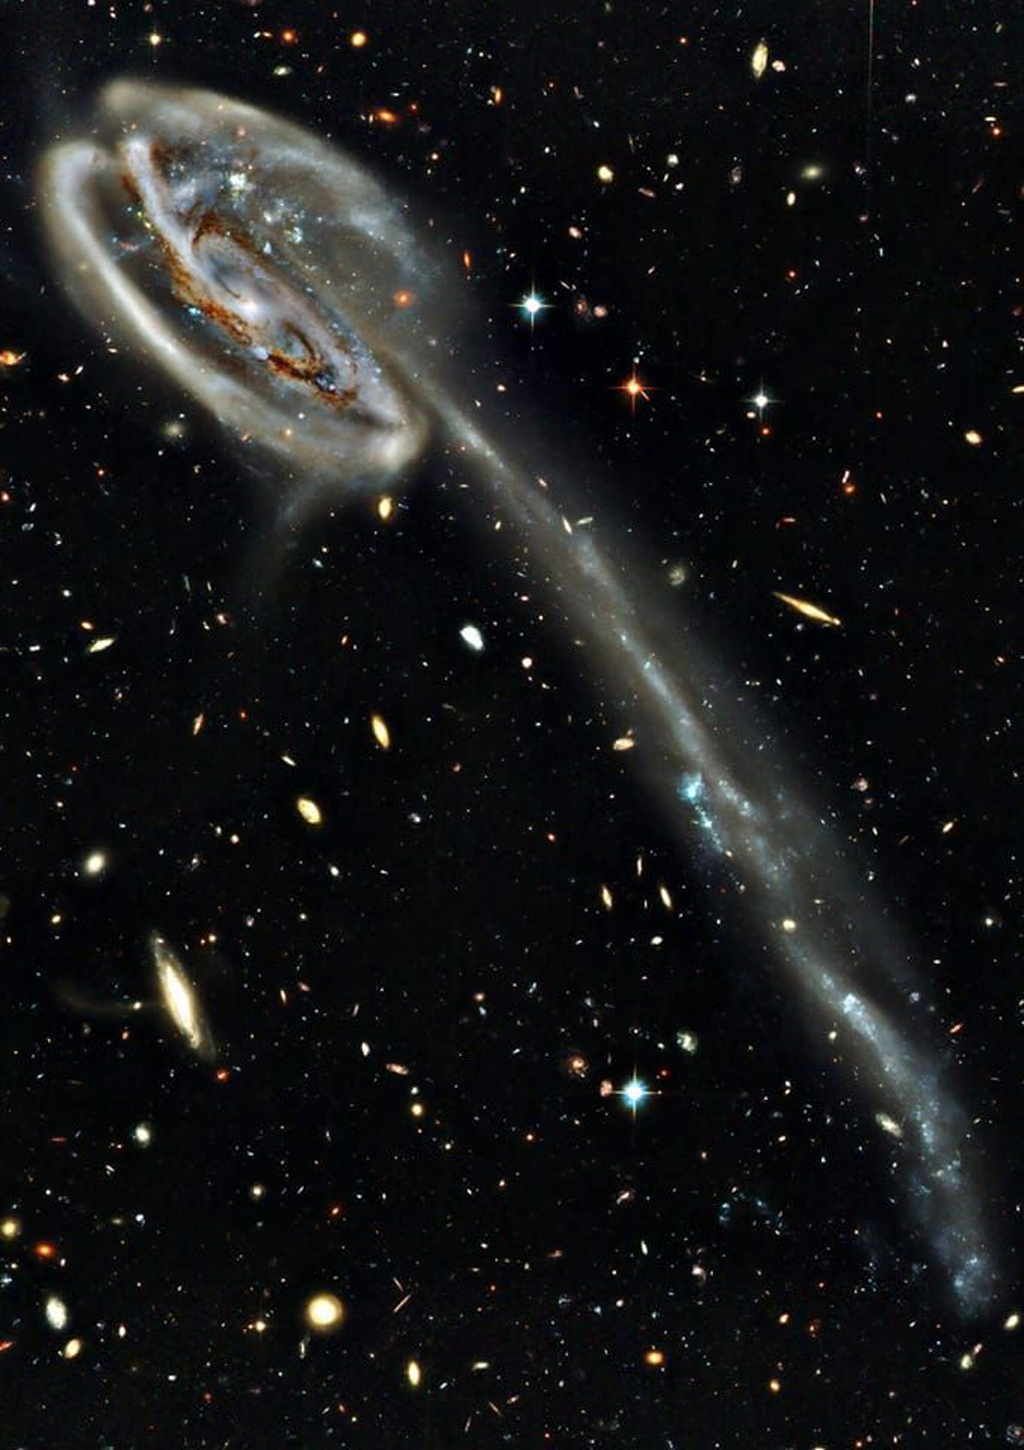 A galaxy known as 'Tadpole' starts in the upper left as a spiral with a long diffuse tail that wraps around and trails all the way down to the bottom right of the image, disturbed by the passage of an unseen galaxy.